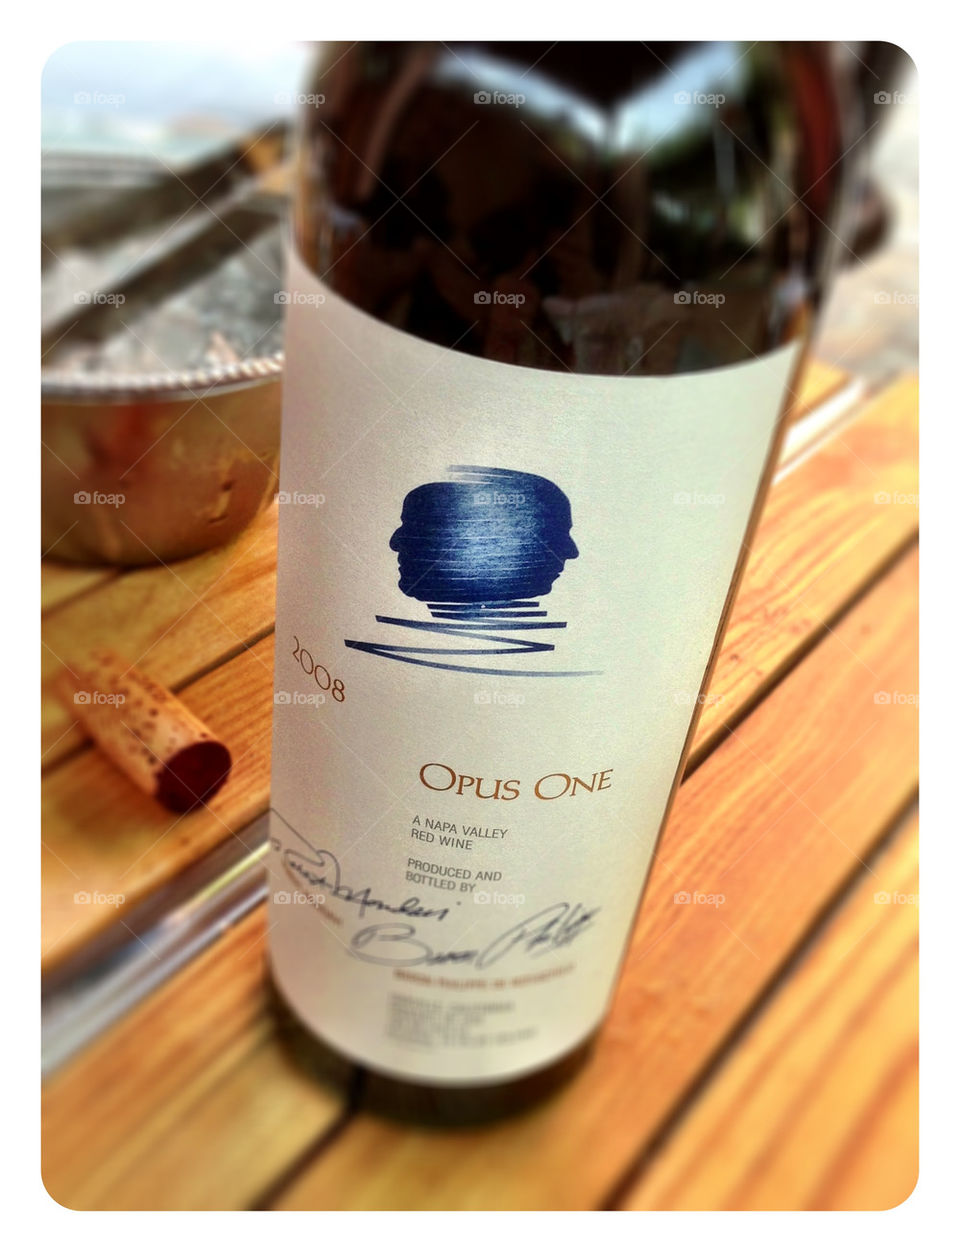 Bottle of 2008 Opus One red wine.